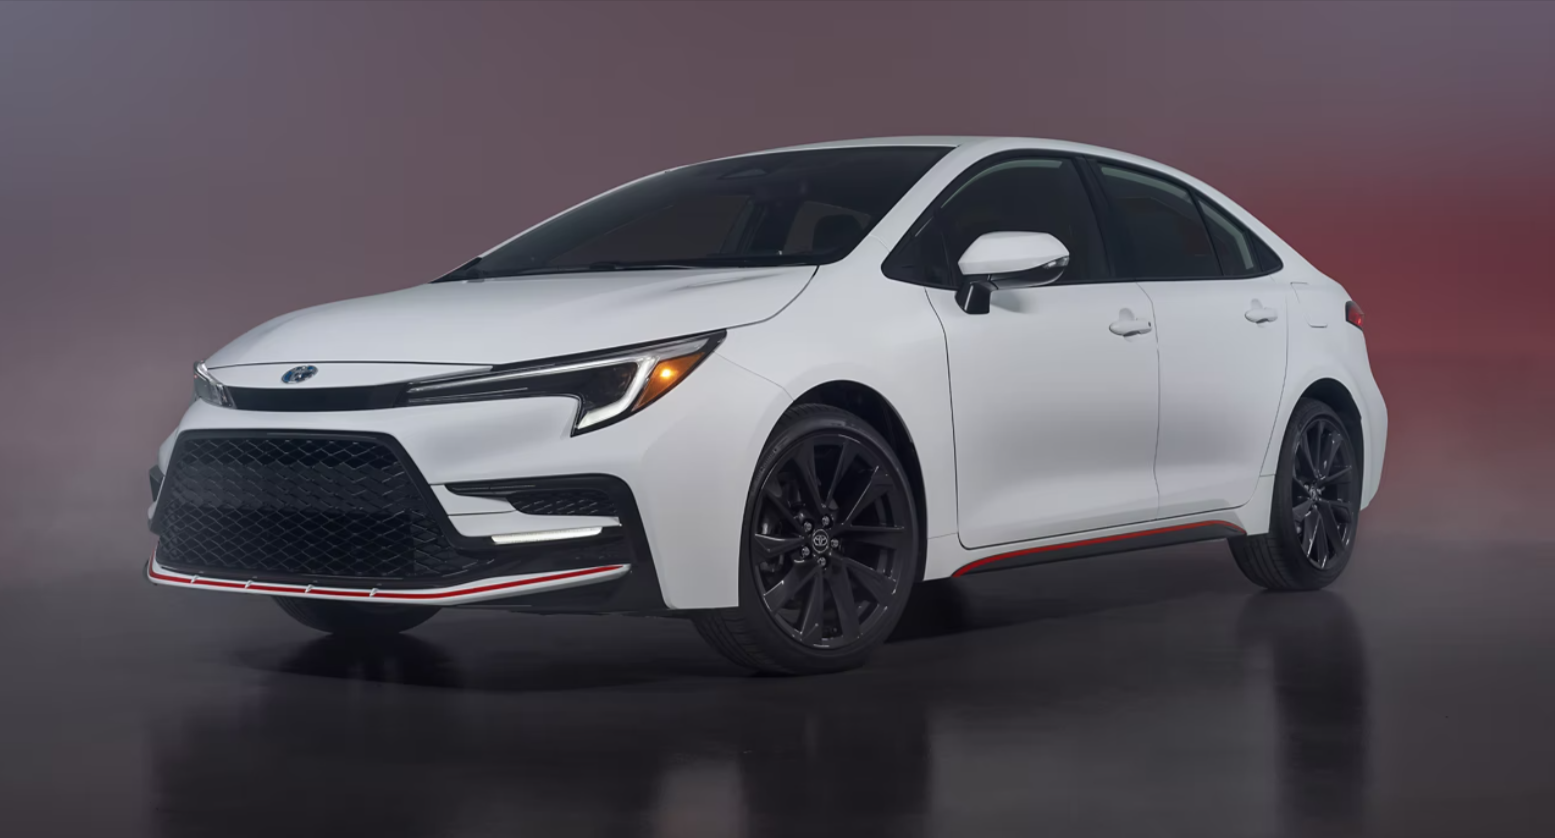 Toyota Corolla Ground Clearance: What to Know - CoPilot